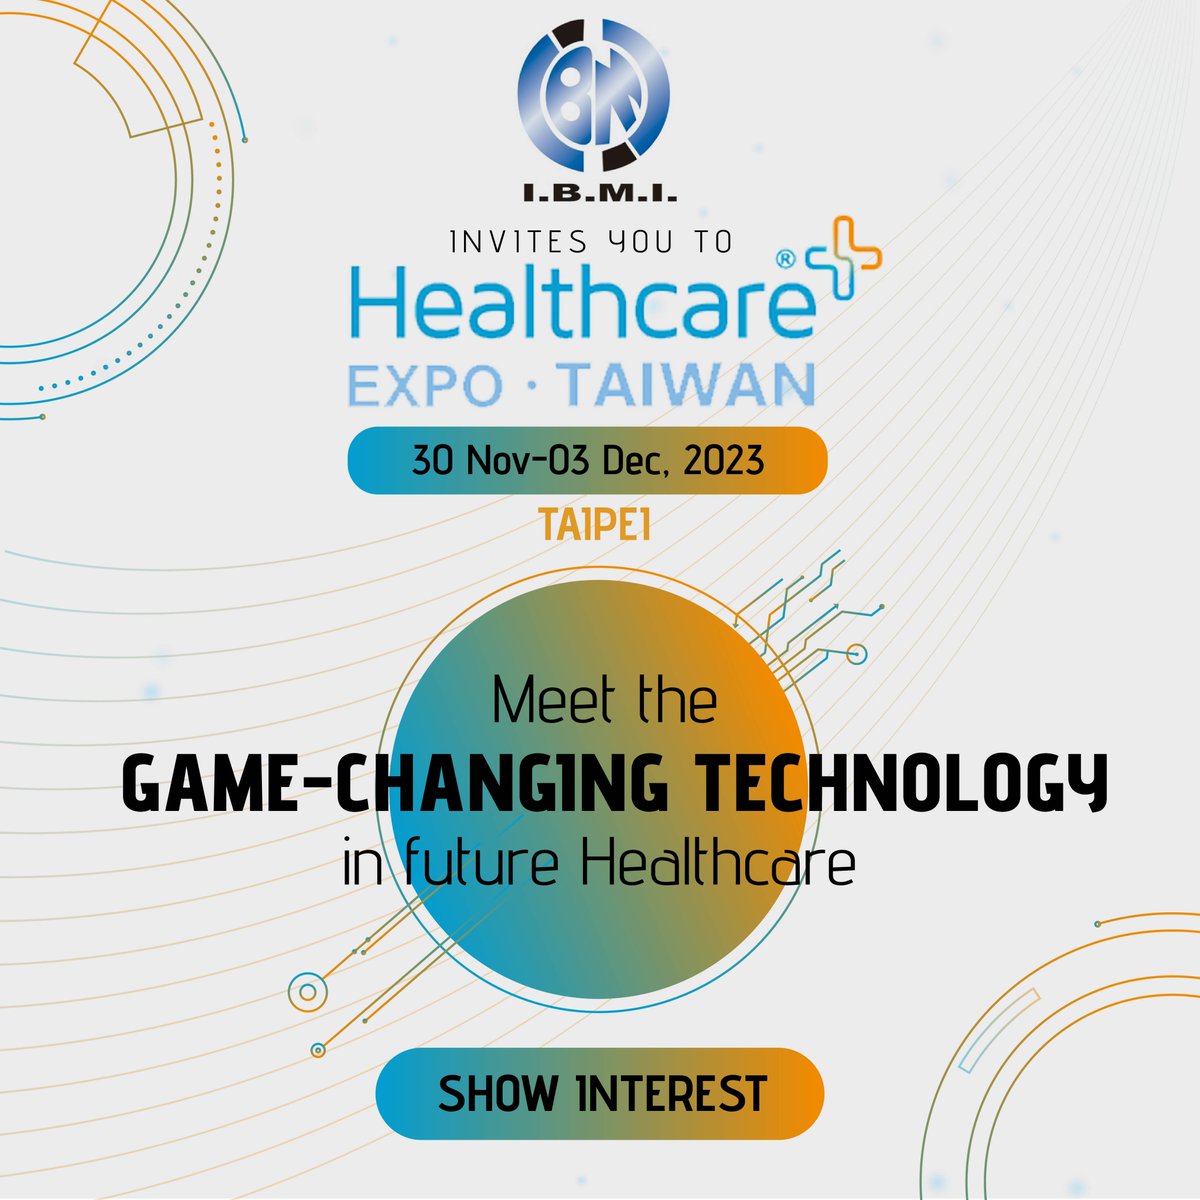 TAKE THE LEAD AND BEAT THE FIELD WITH GAME CHANGING TECHNOLOGIES

Purchasing & procurement departments, digital healthcare providers, local agents and distributors. Be part of an exciting future envisaged by Taiwan Institute for Biotechnology and Medicine Industry (IBMI).